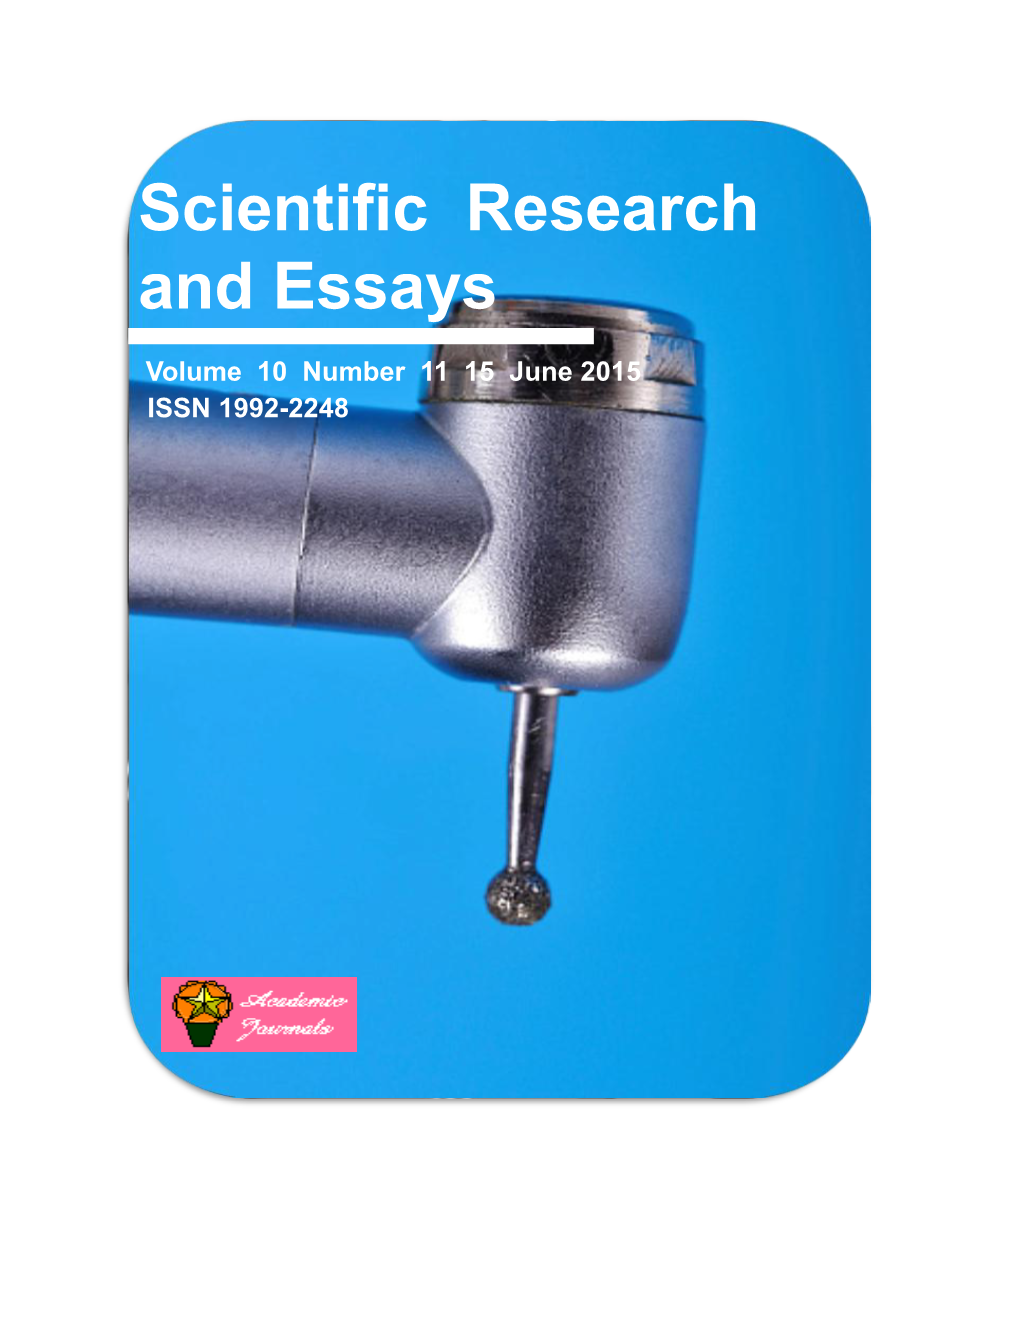 Scientific Research and Essays